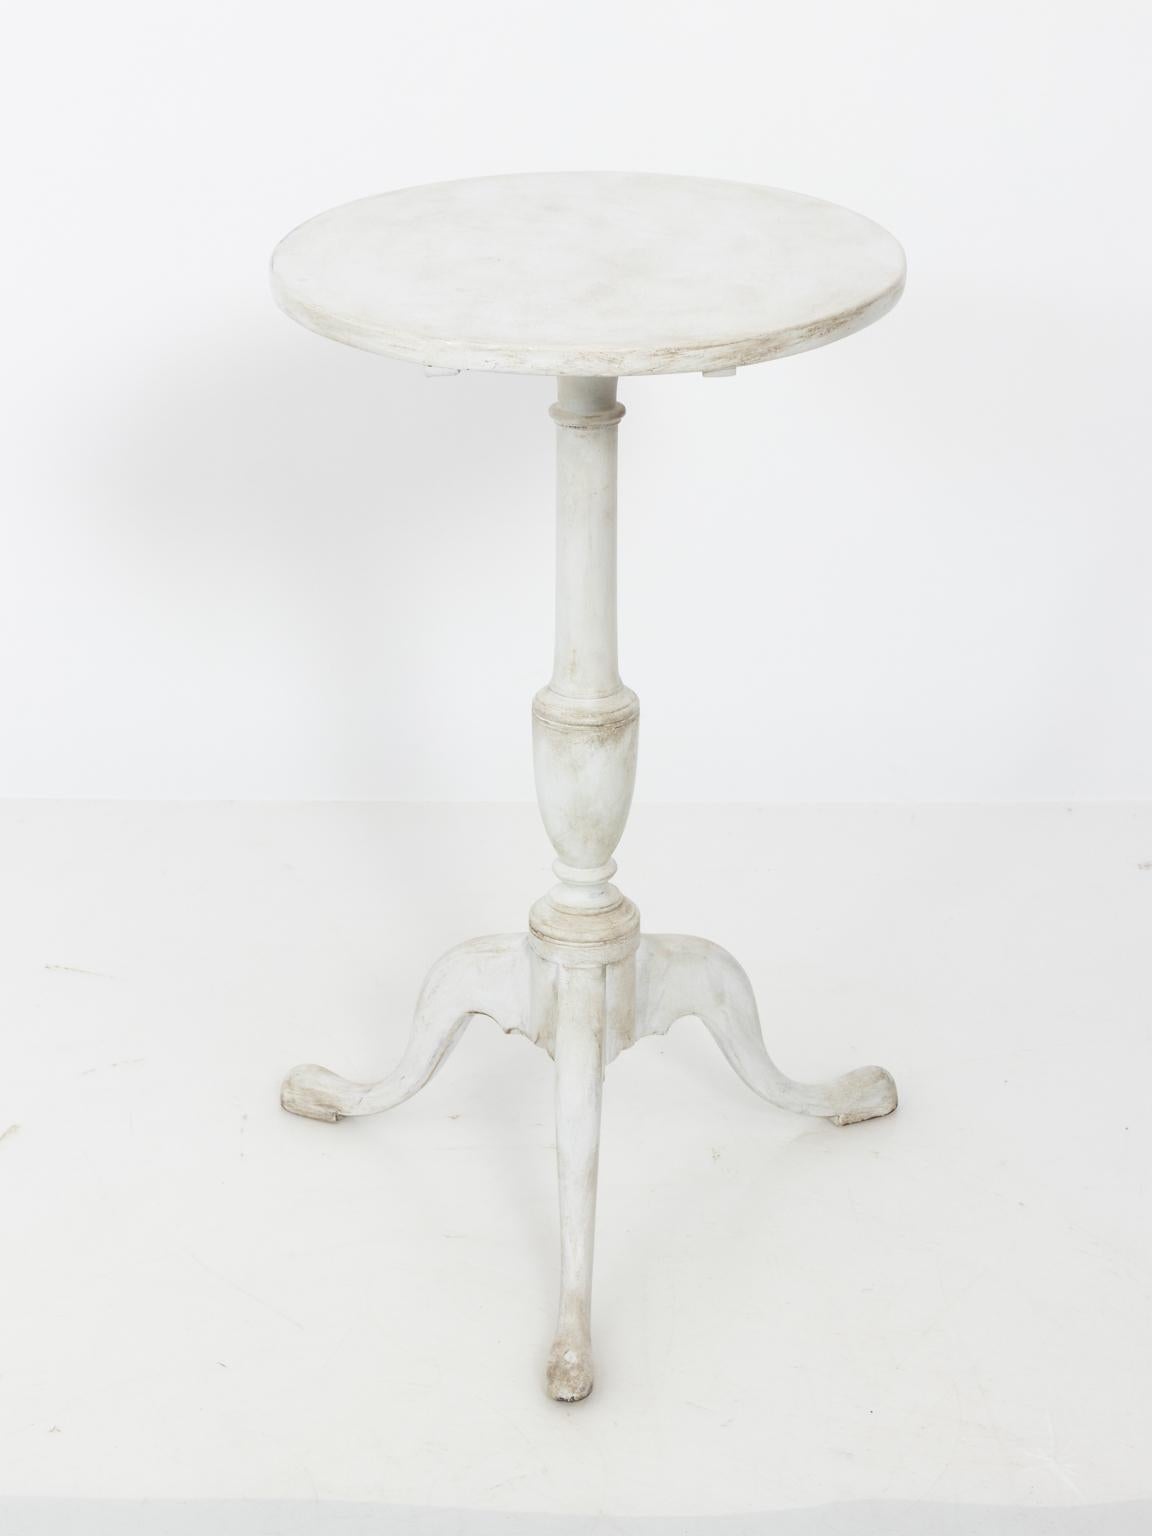 20th Century White Painted Gustavian Oval Tilt-Top Table, circa 1930s